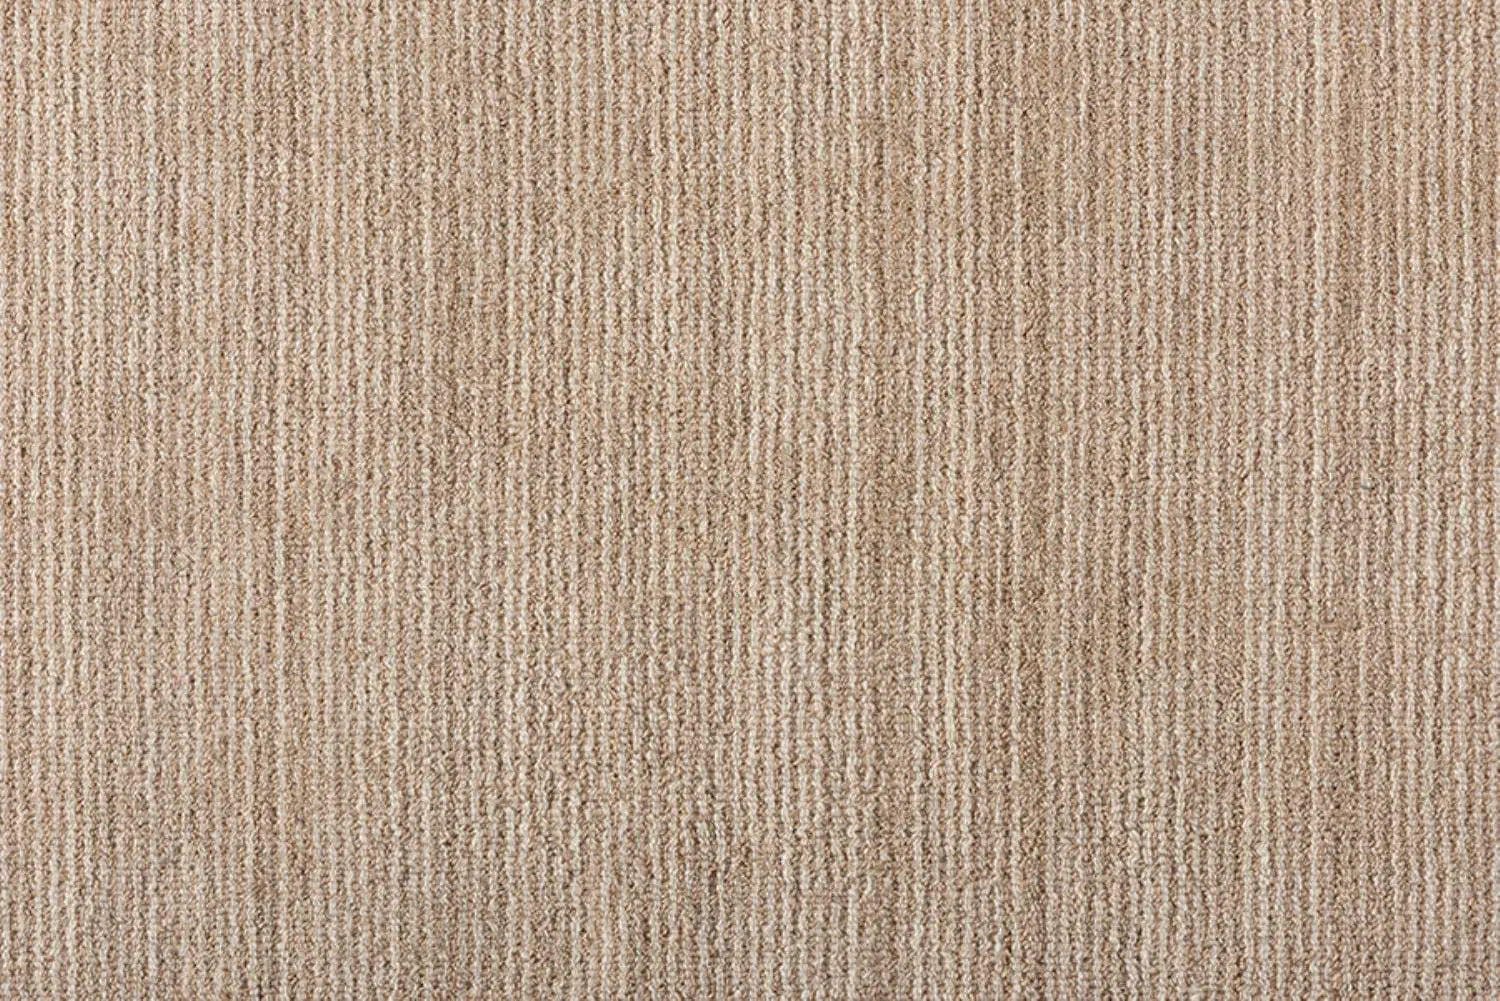 Baxton Studio Aral Modern and Contemporary Beige Handwoven Wool Area Rug